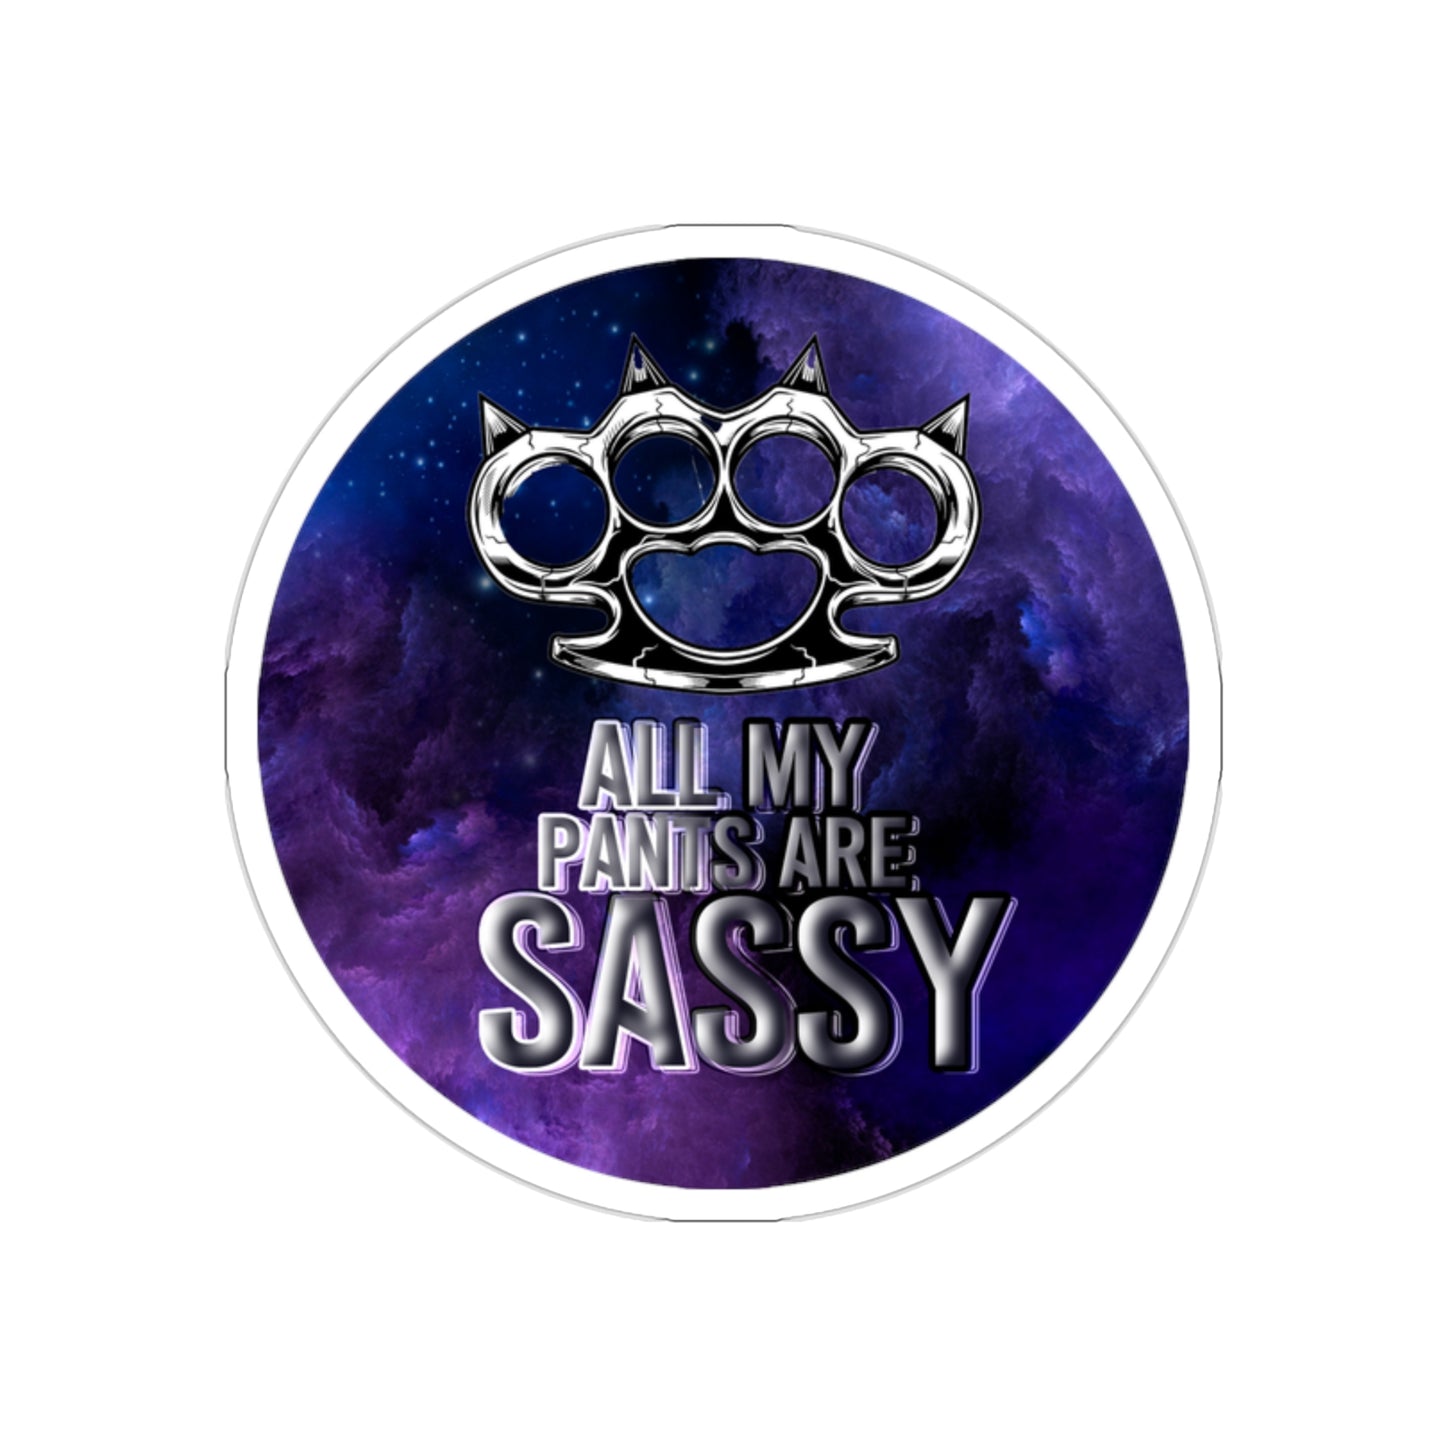 'All My Pants Are Sassy' Die-Cut Stickers